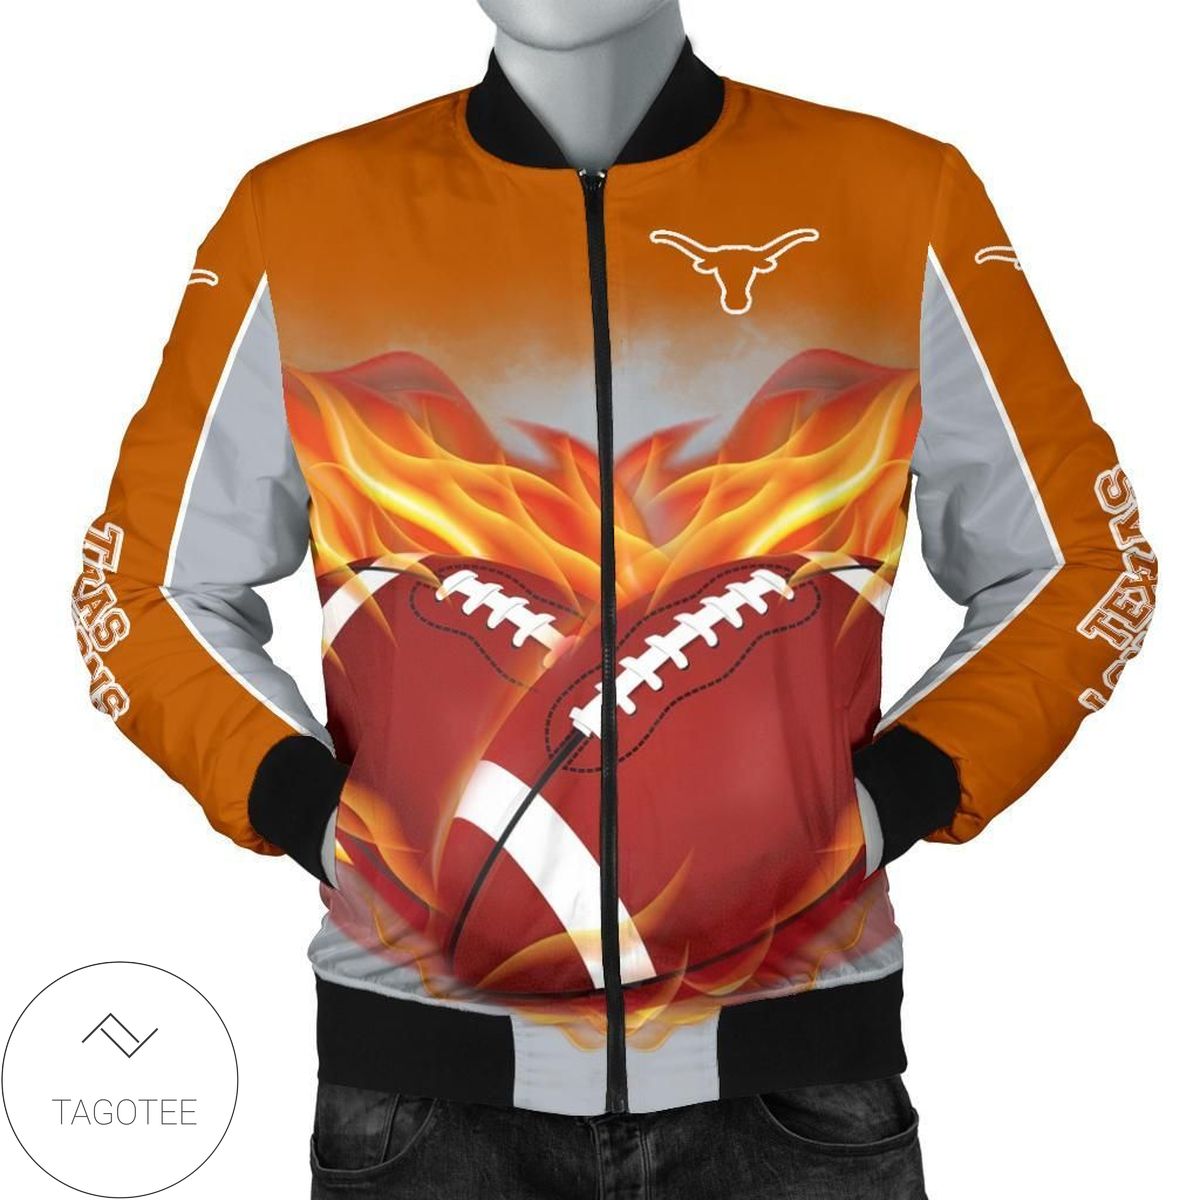 Playing Game With Texas Longhorns 3d Printed Unisex Bomber Jacket